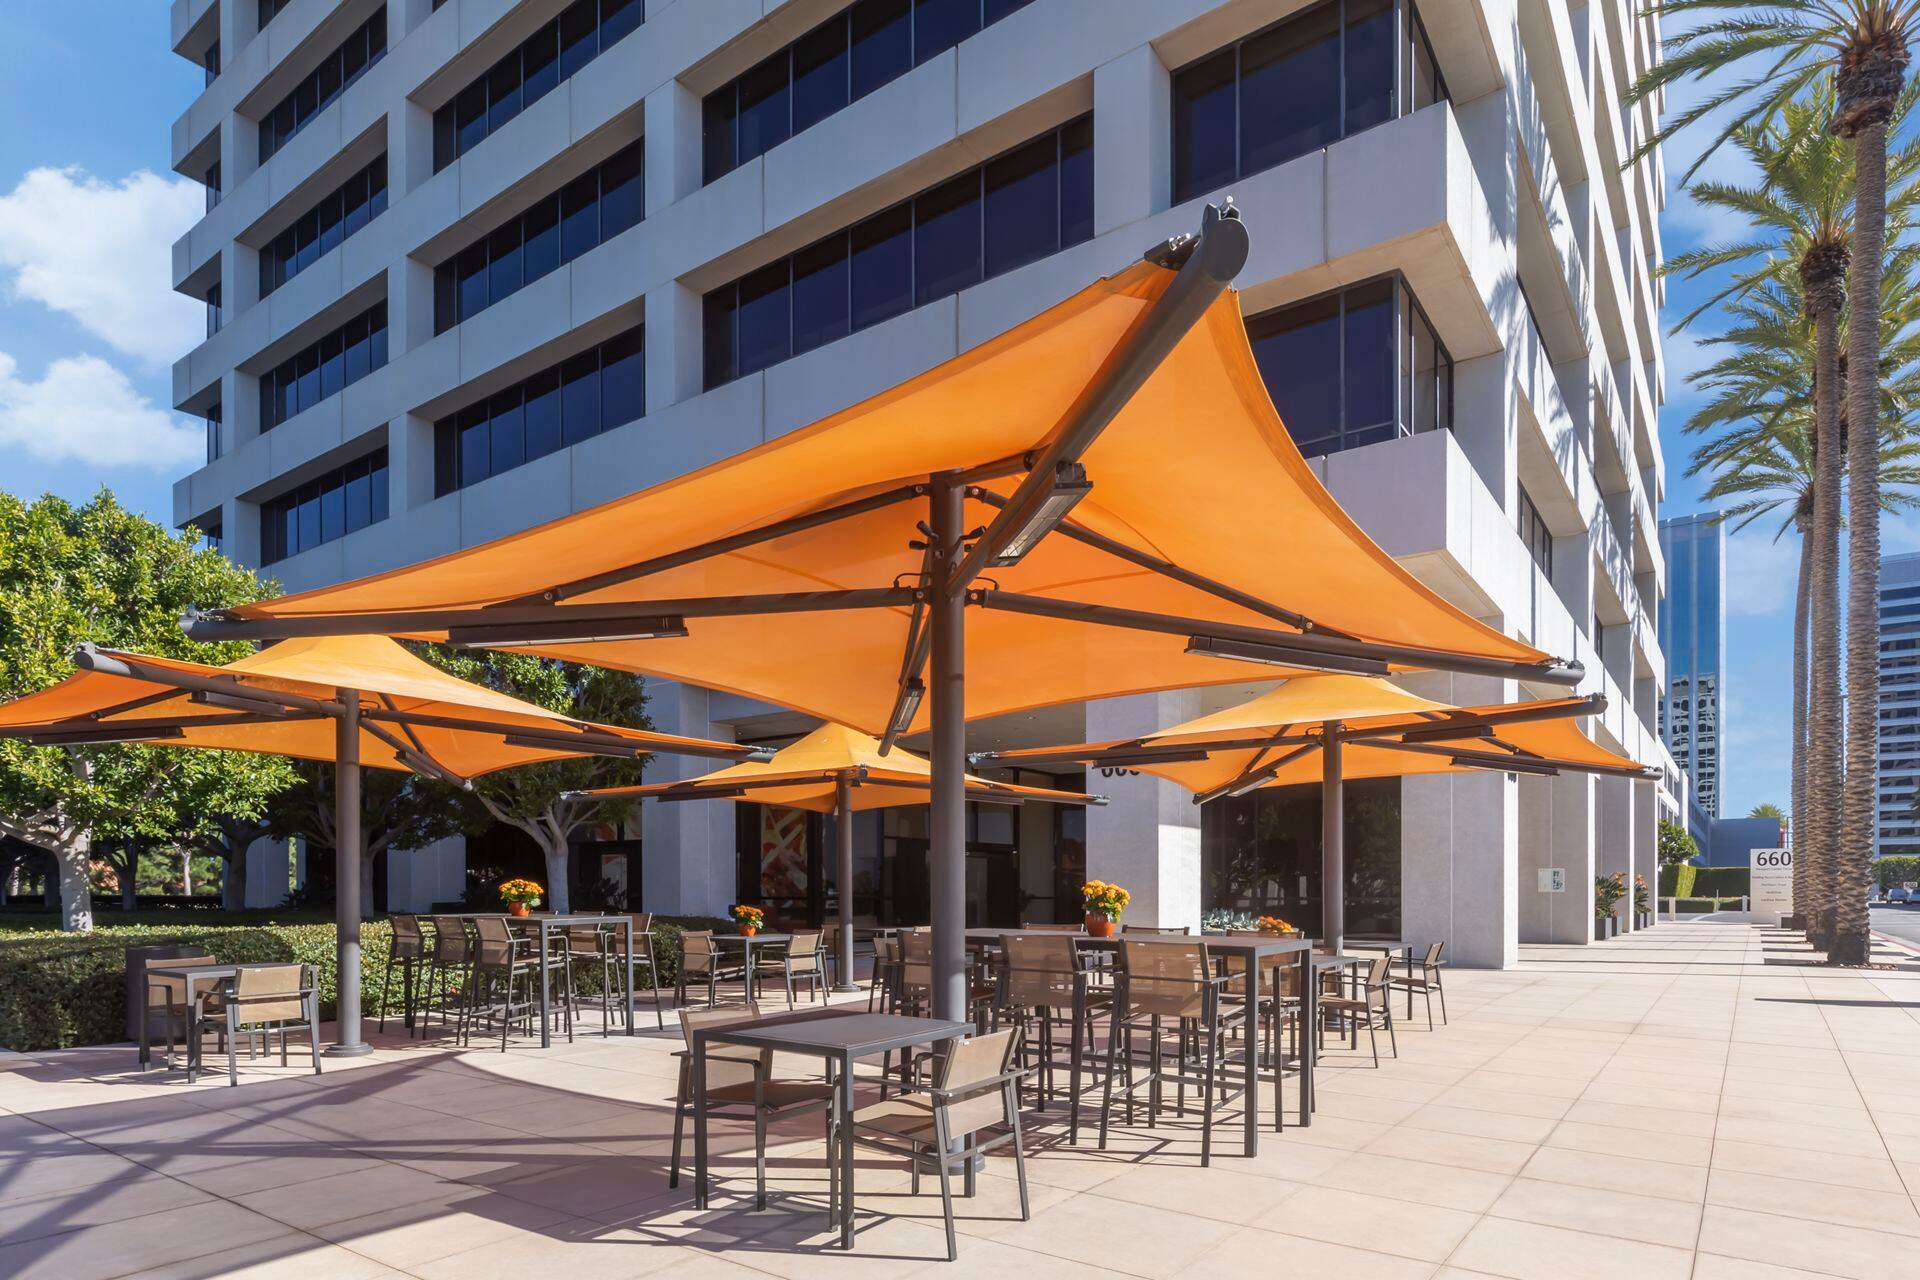 Exterior view of the outdoor workspace area at 680 Newport Center Drive in Newport Beach, CA.